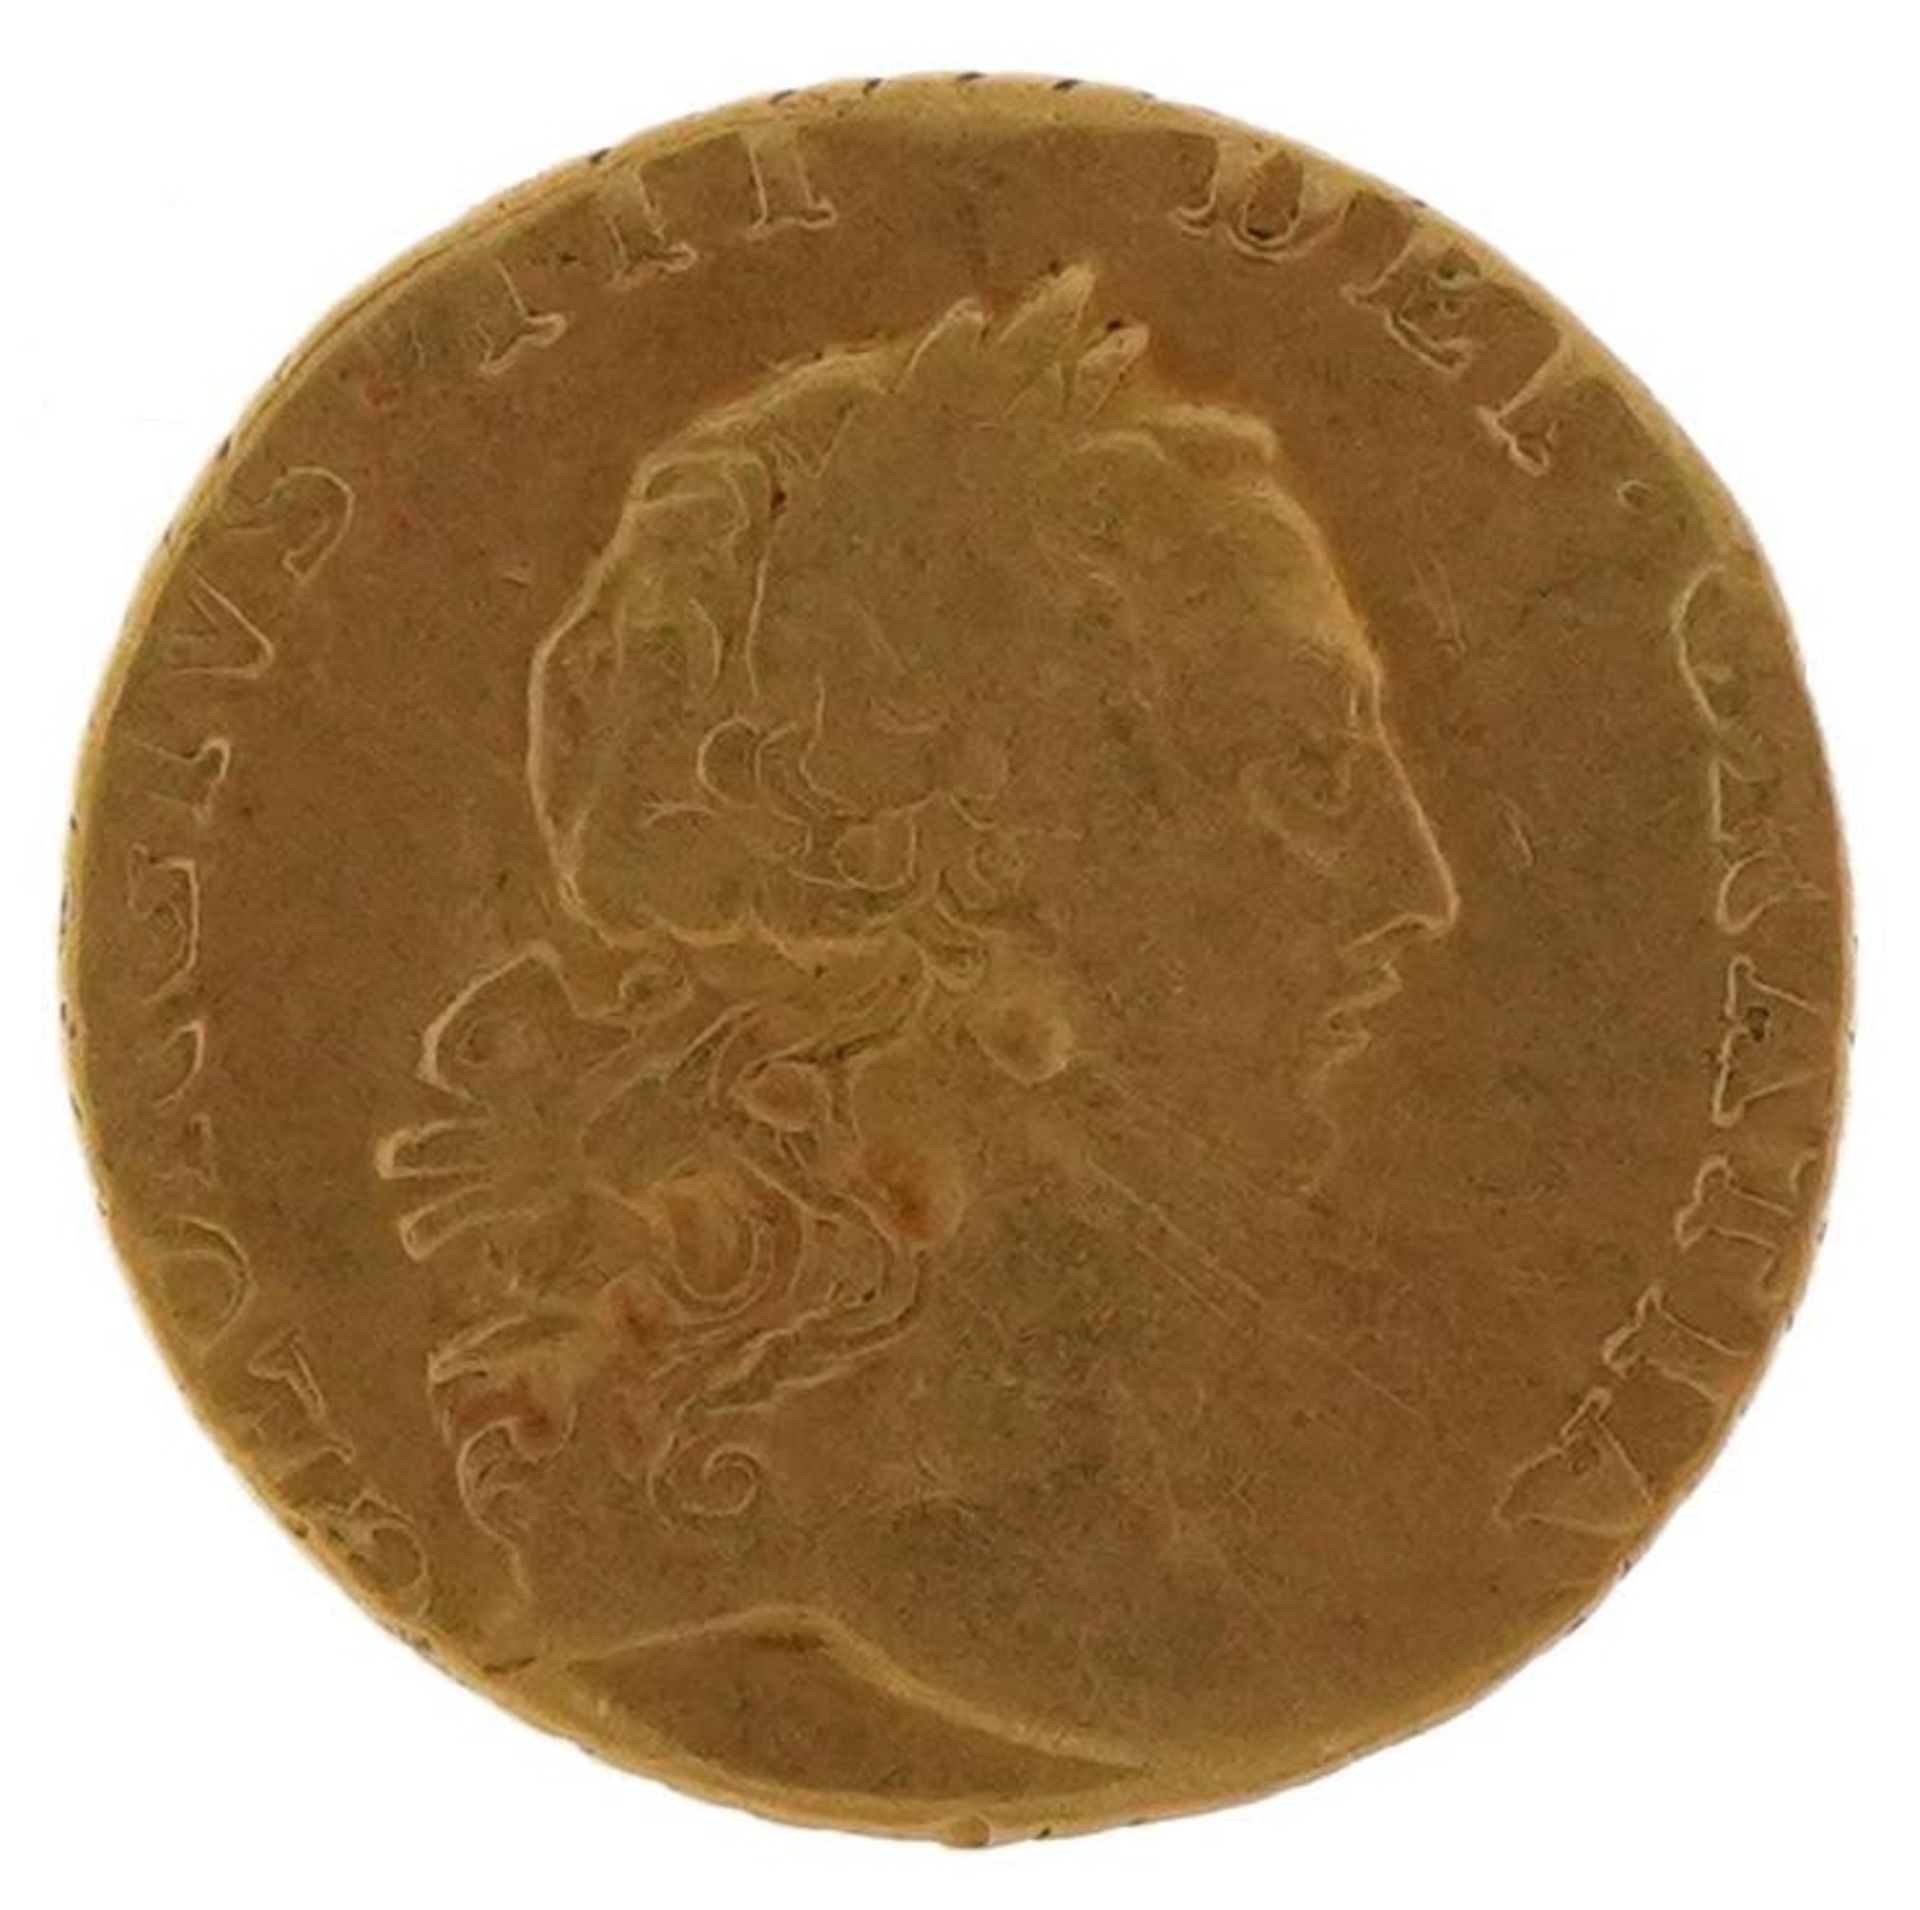 George III 1762 gold 1/4 guinea : For further information on this lot please visit www. - Image 2 of 3